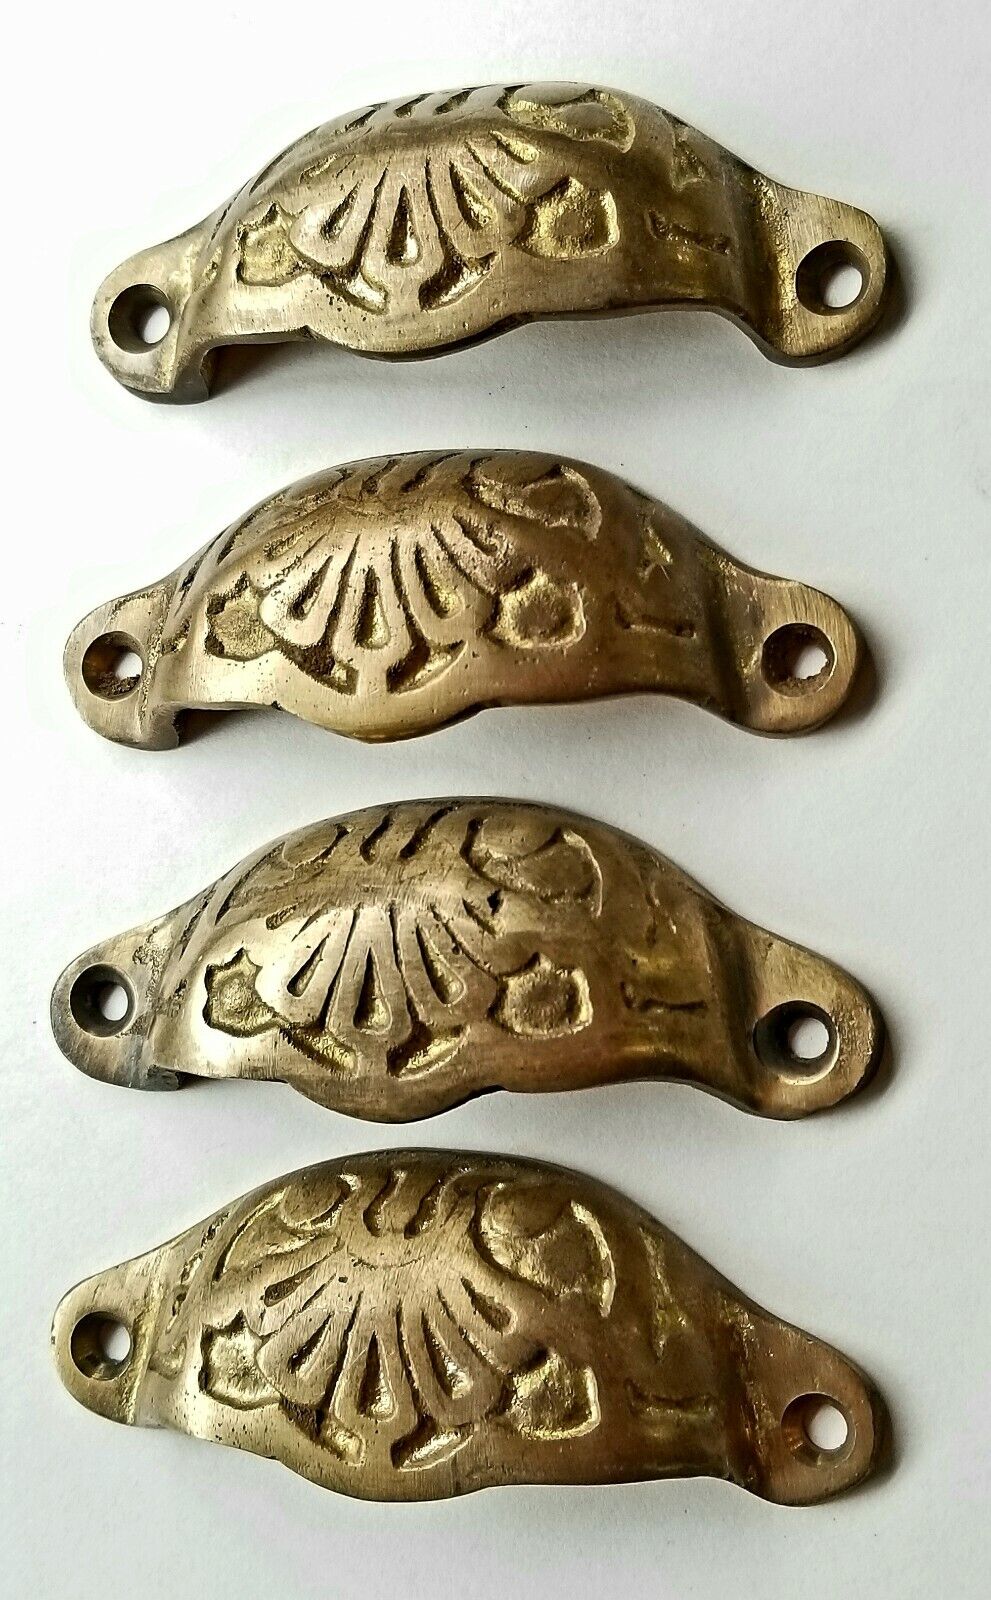 4 Apothecary Drawer Cup Pulls Handles Ant. Victorian Style Solid Brass 3"c. #A20